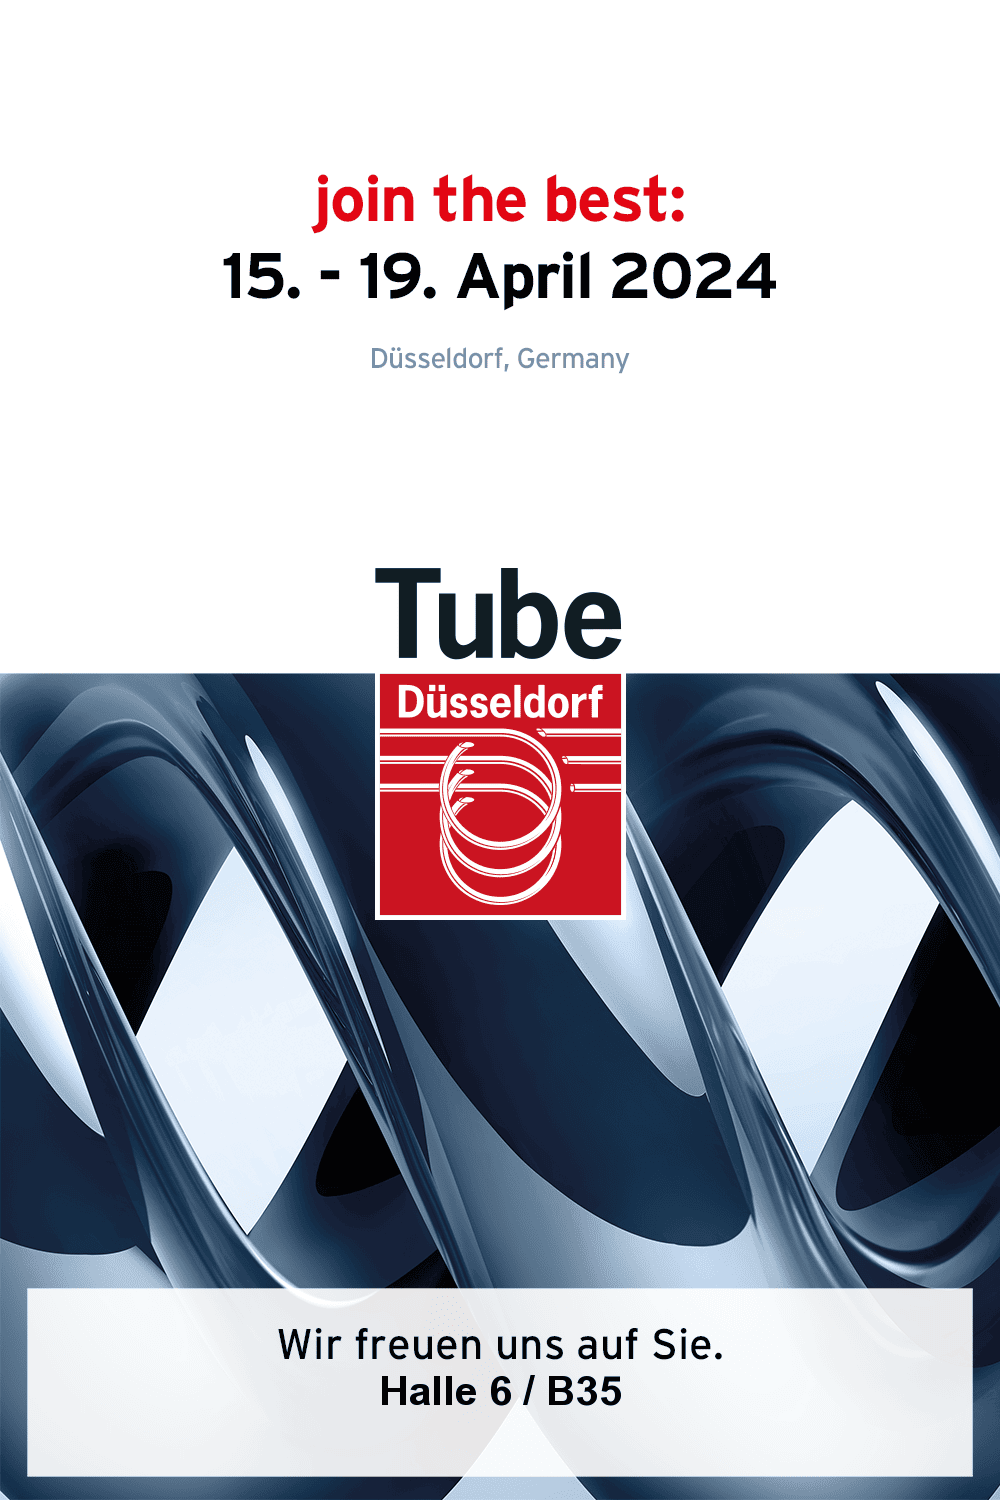 Tube 15. – 19. April 2024 – come and visit us – we look forward to welcoming you!